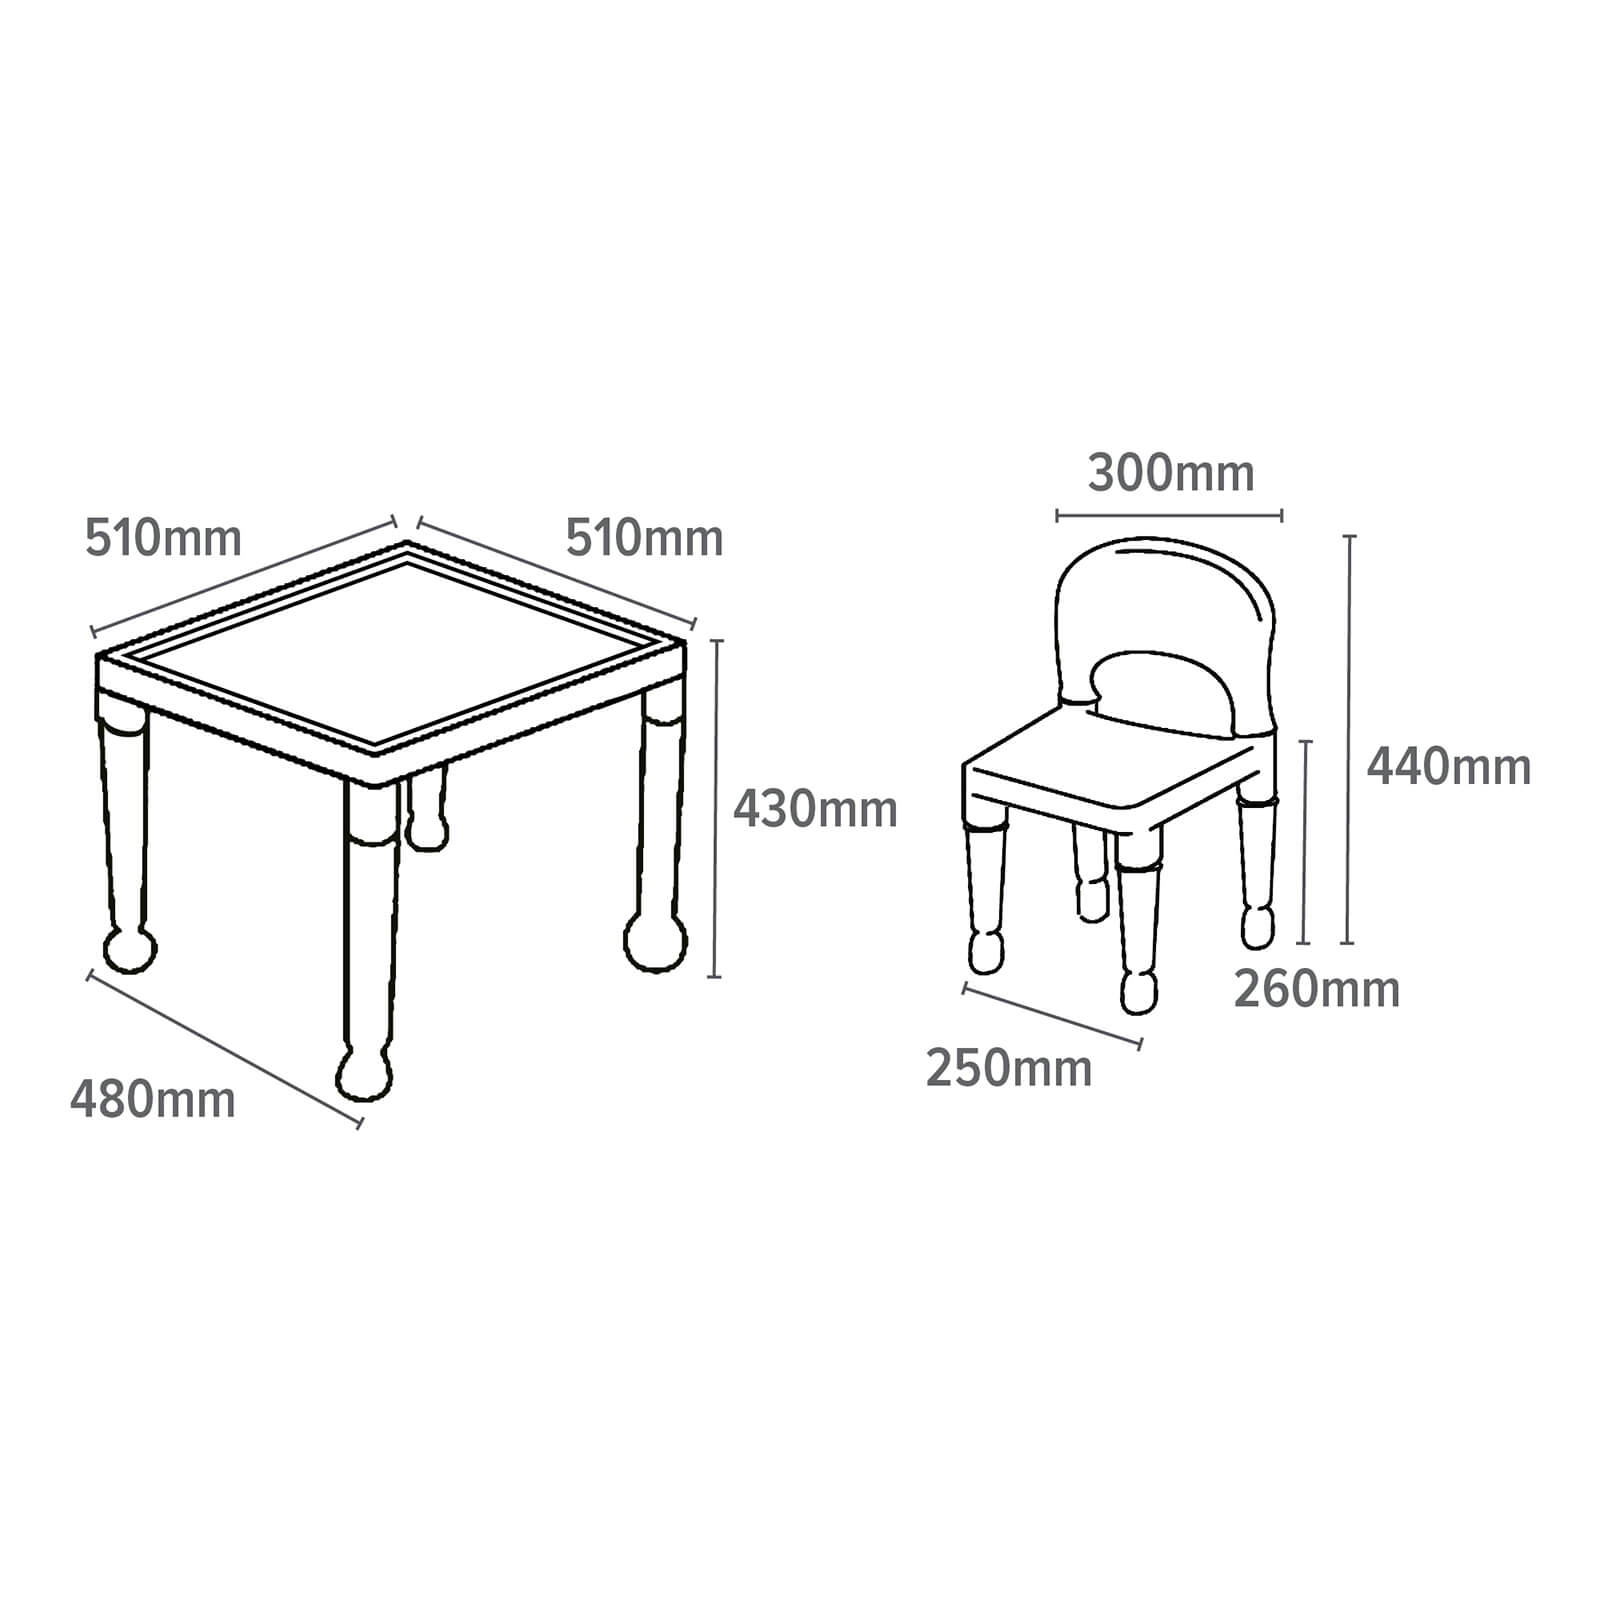 White Plastic Table and Chair Set